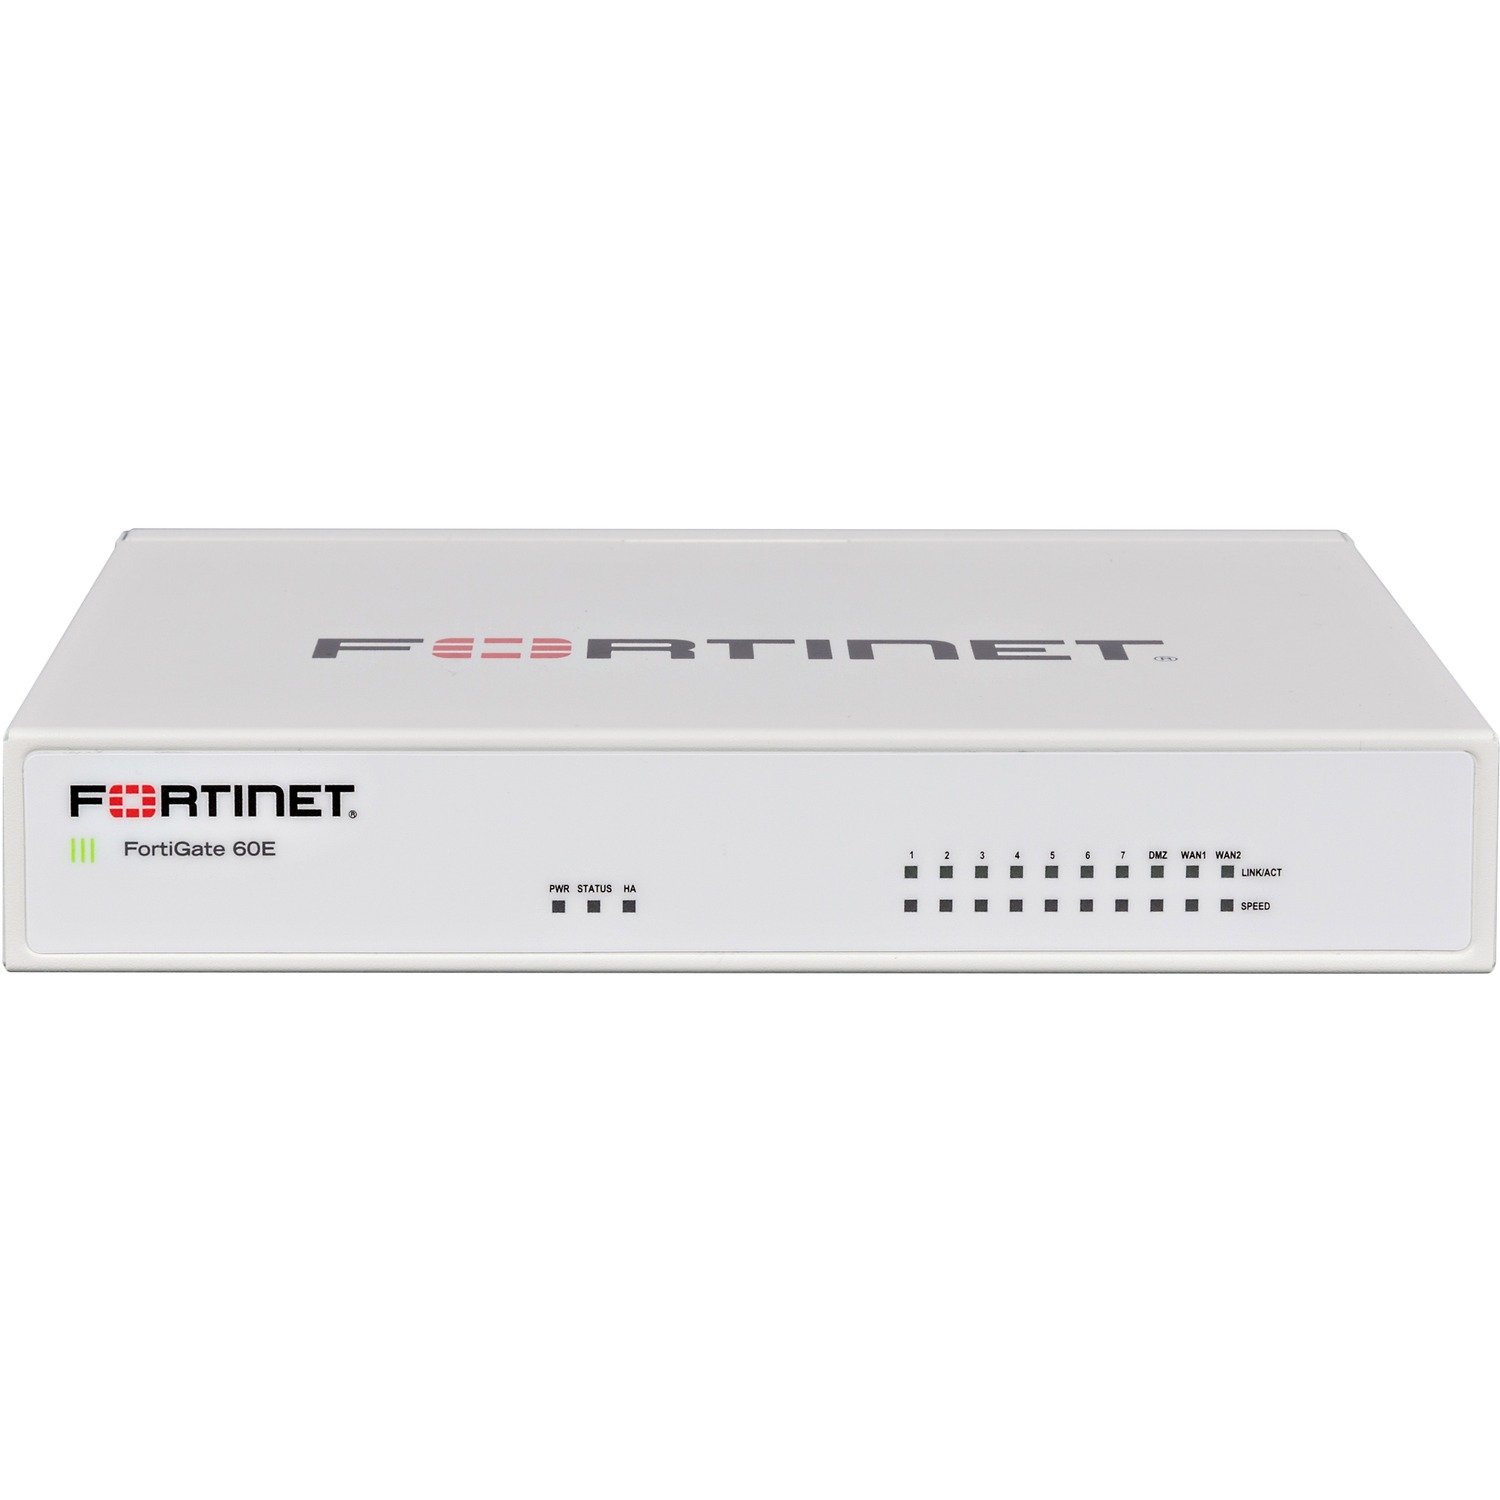 Fortinet FortiGate 60E Network Security/Firewall Appliance (fg-60e) - image 1 of 6